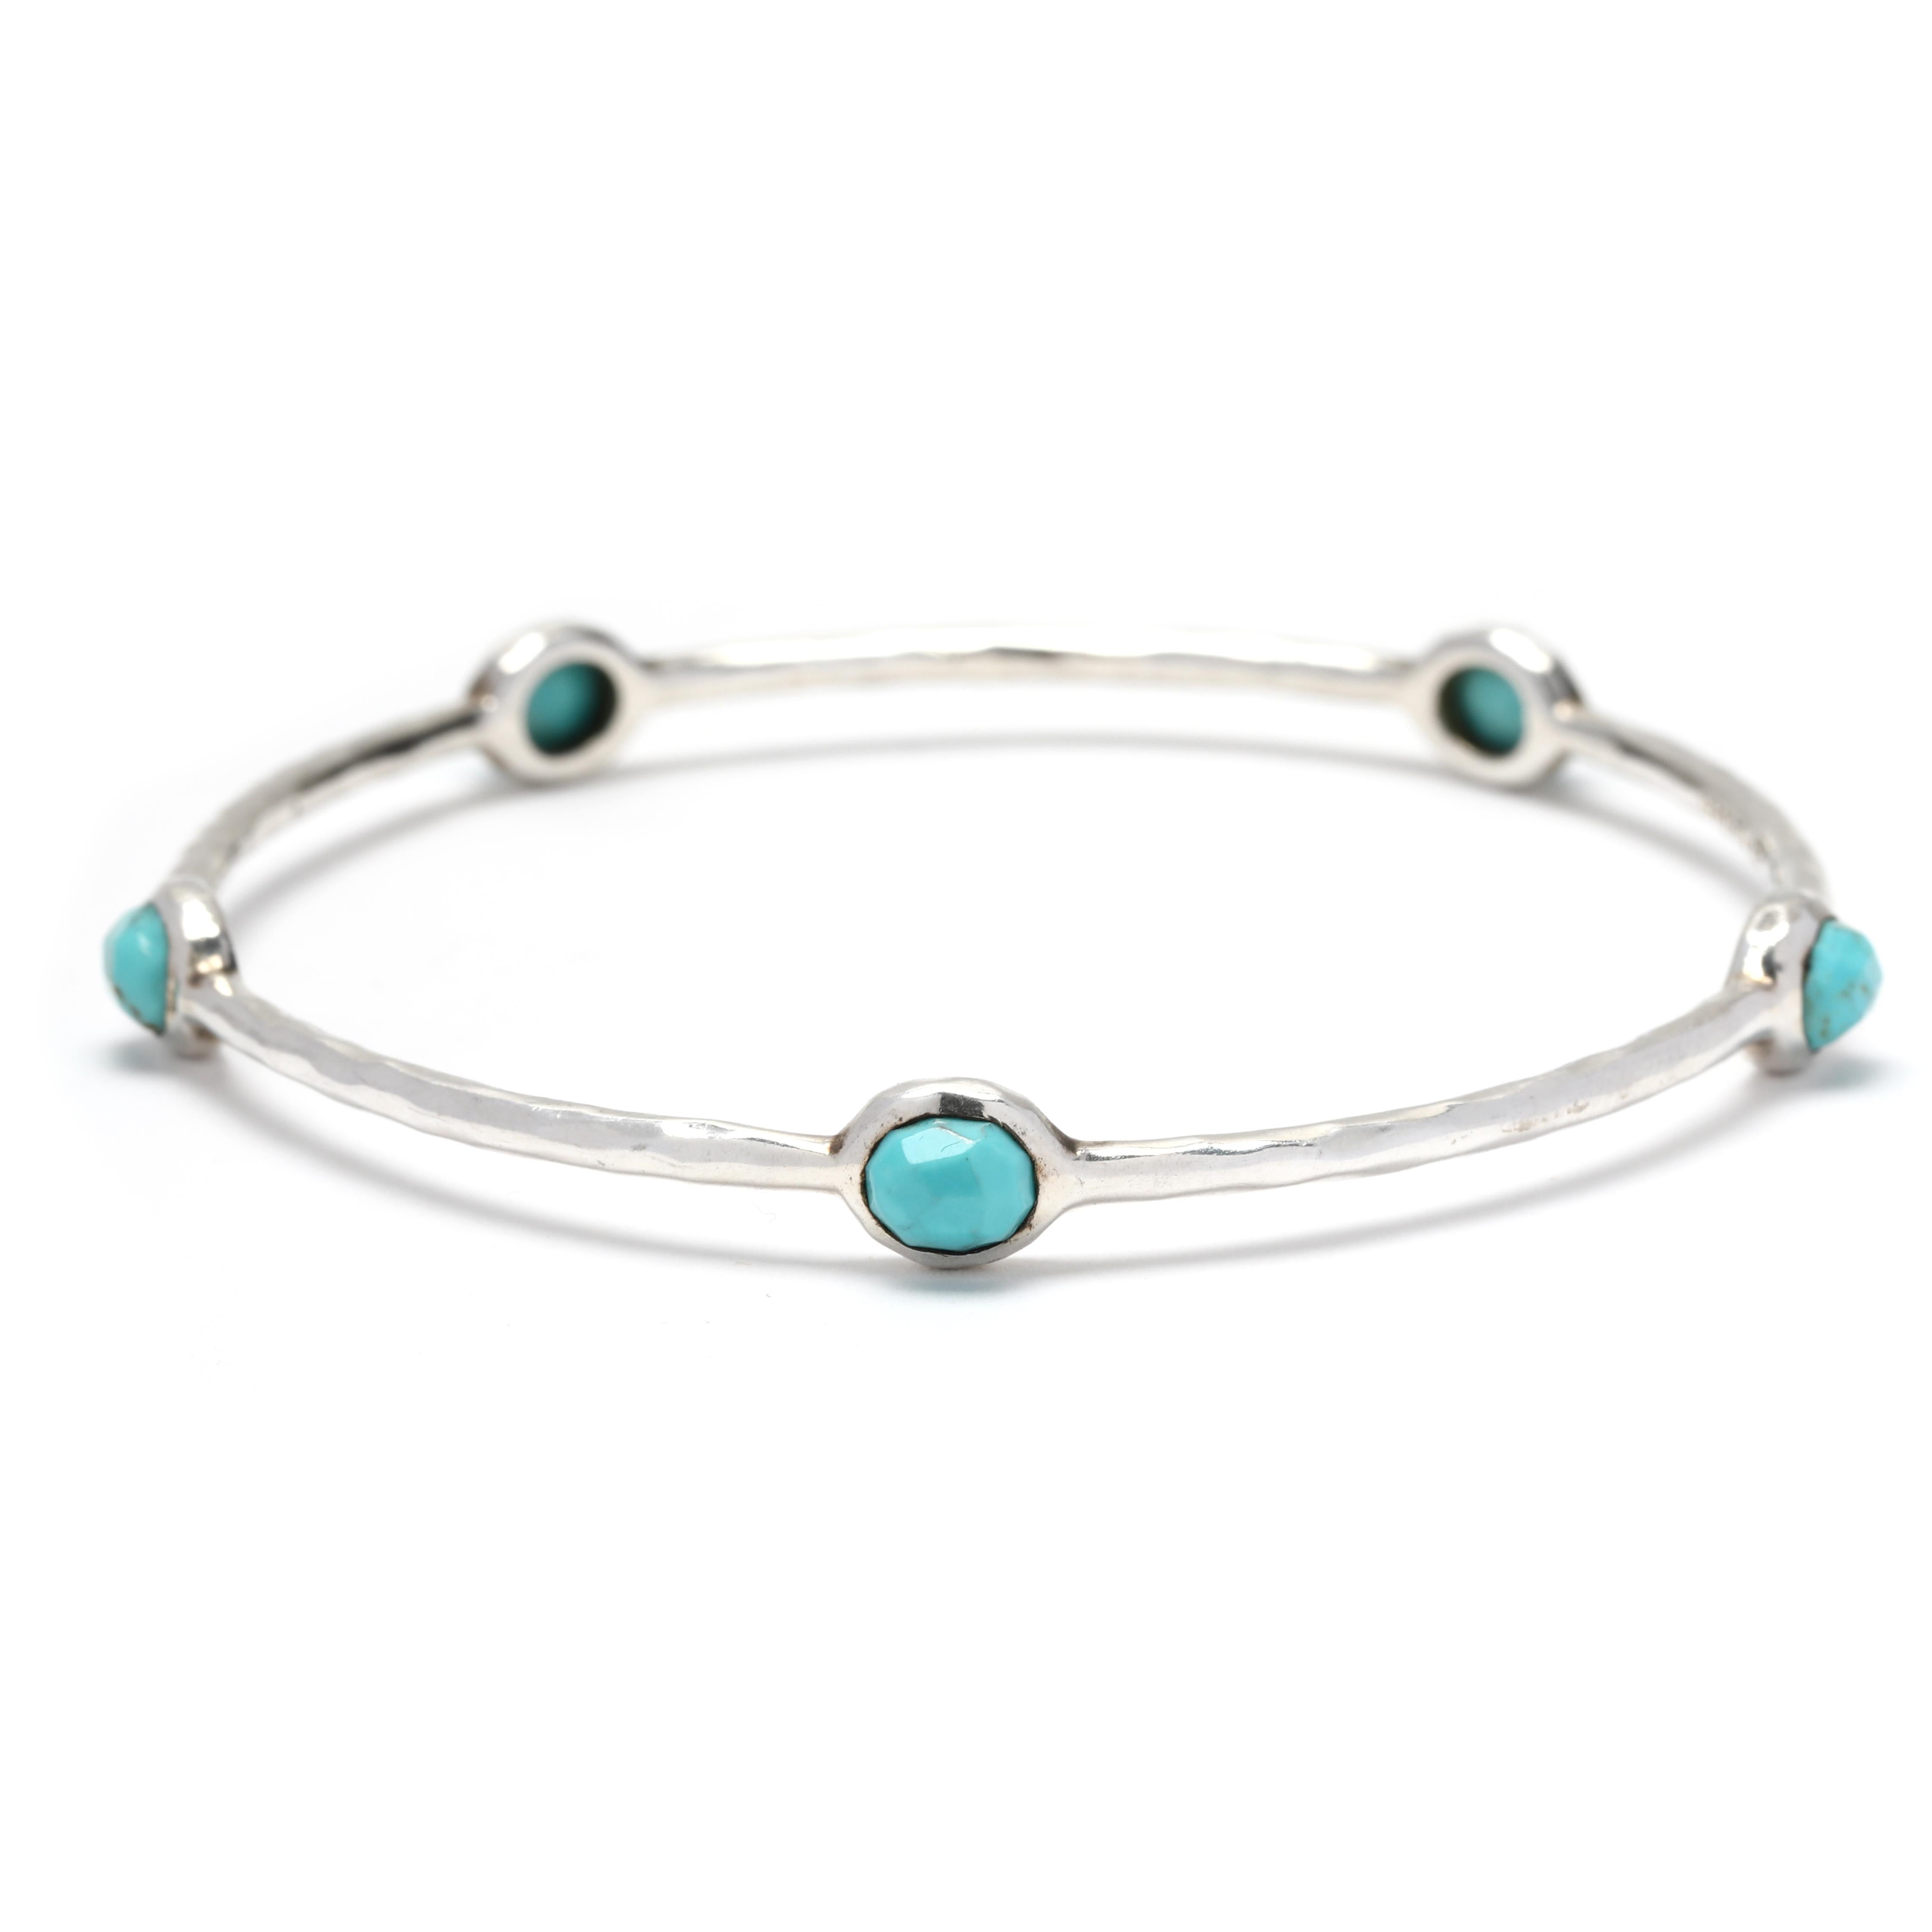 Ippolita RockCandy 5Stone Turquoise BangleBracelet, Sterling Silver, Length 7.88 In Good Condition For Sale In McLeansville, NC